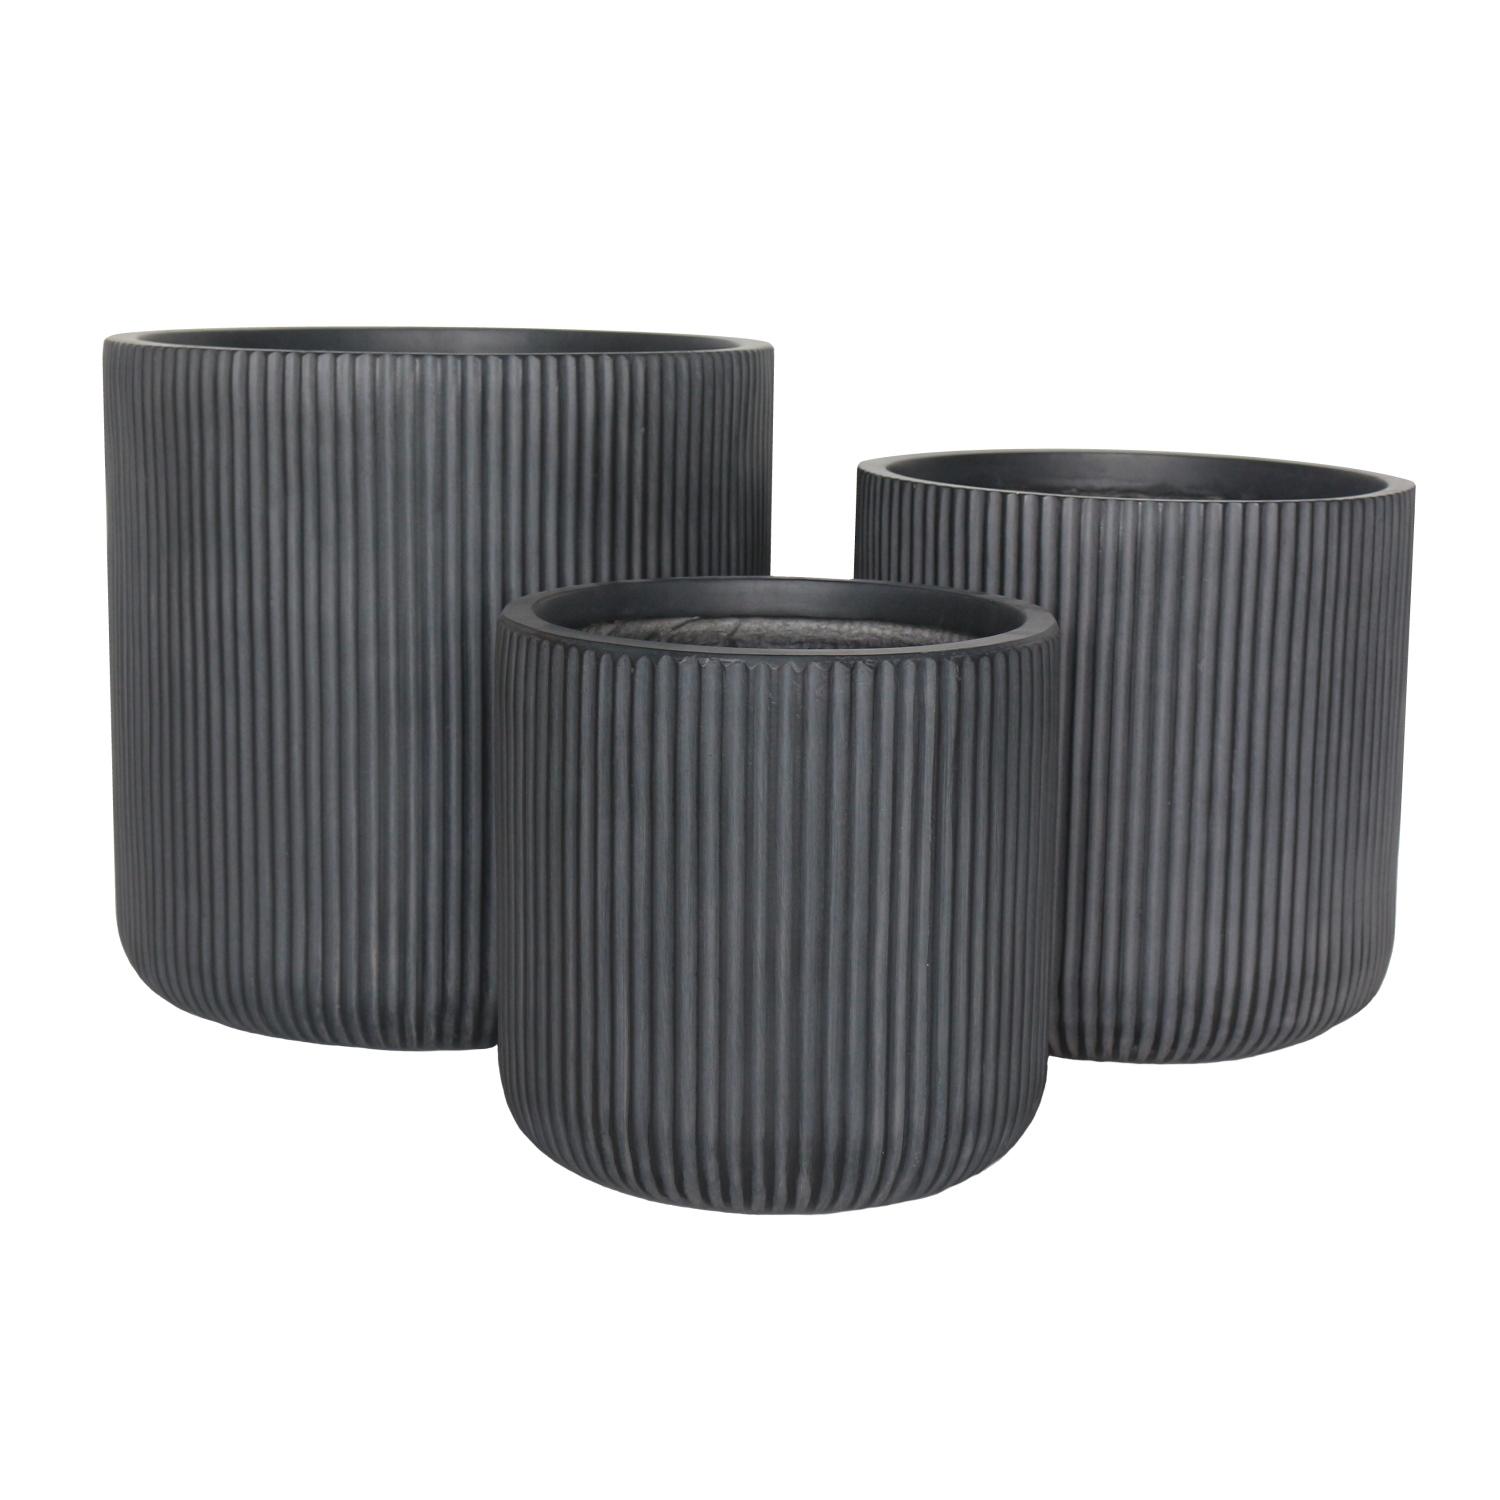 Ribbed Black Round Outdoor Planter D36.5 H37 cm, 38.7 ltrs Cap. buy ...